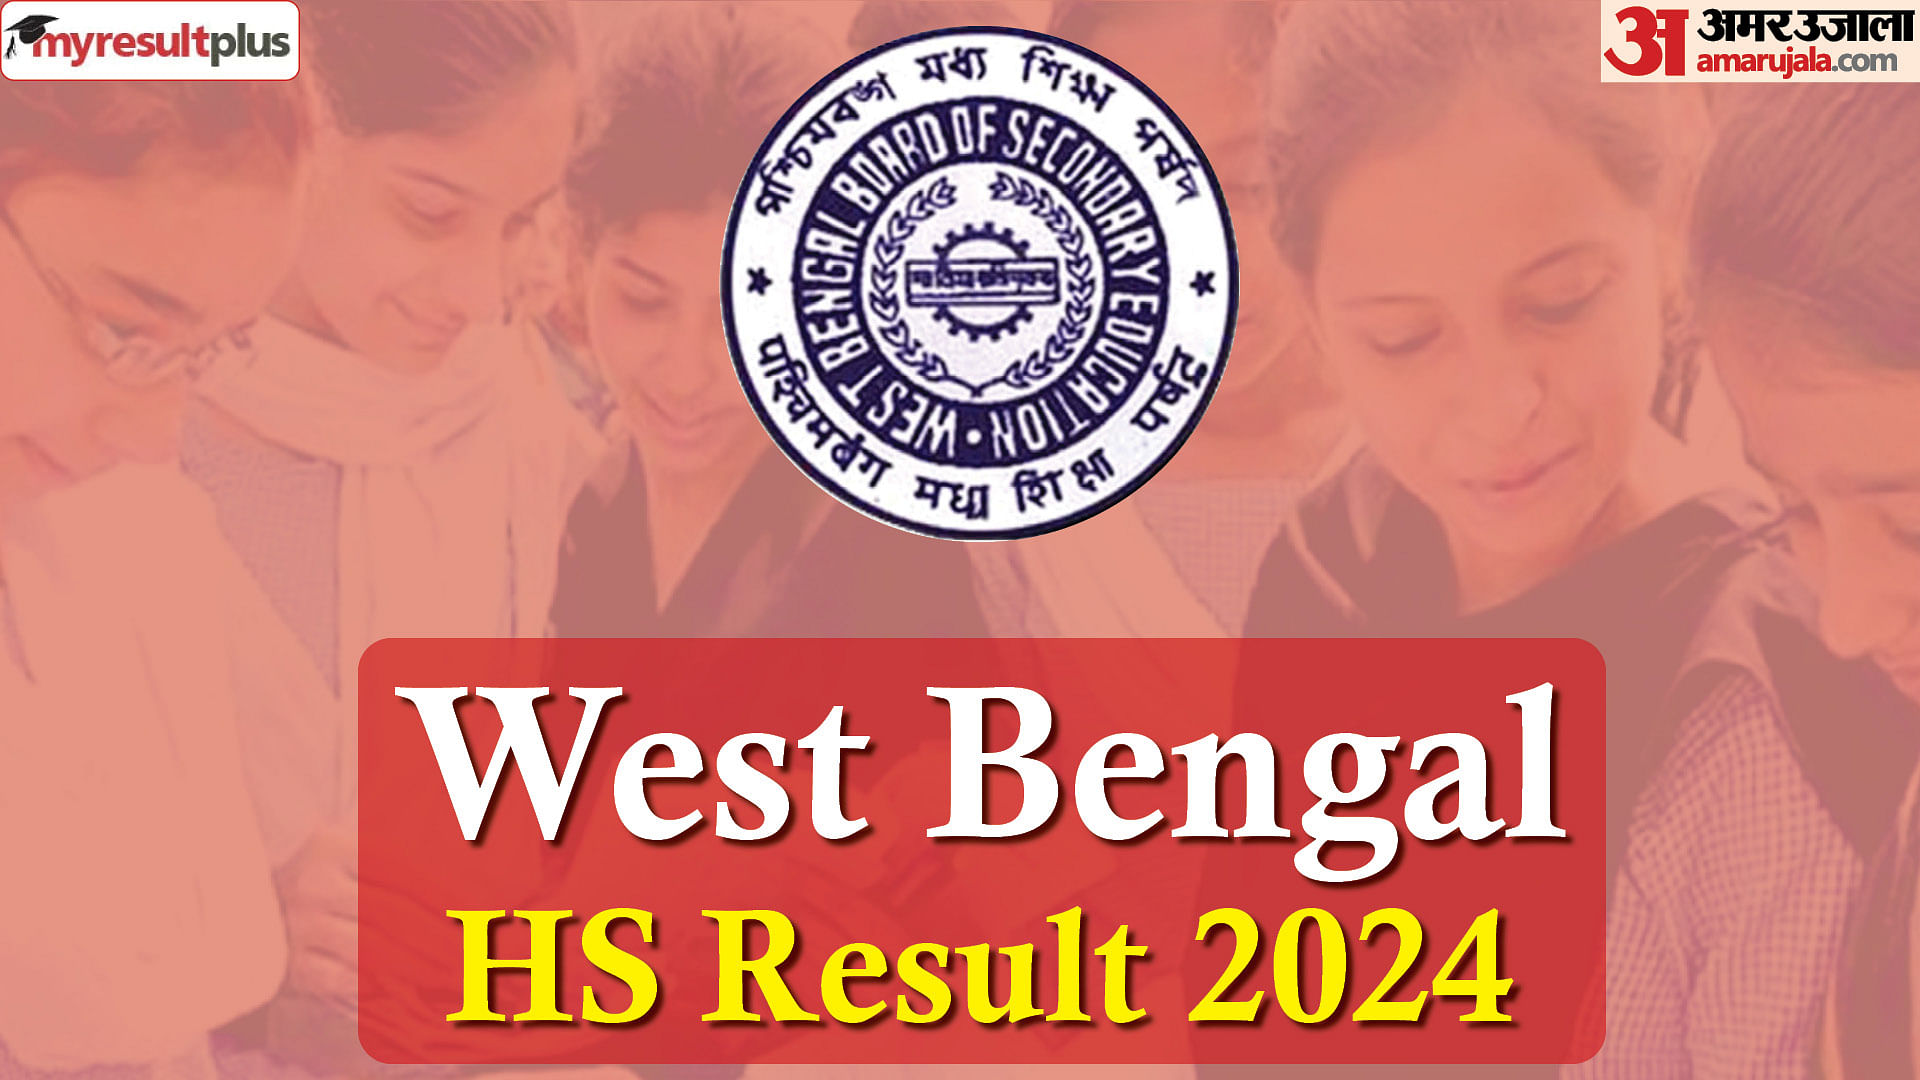 West Bengal HS Result 2024 releasing today, Read about the last year result and analytics here